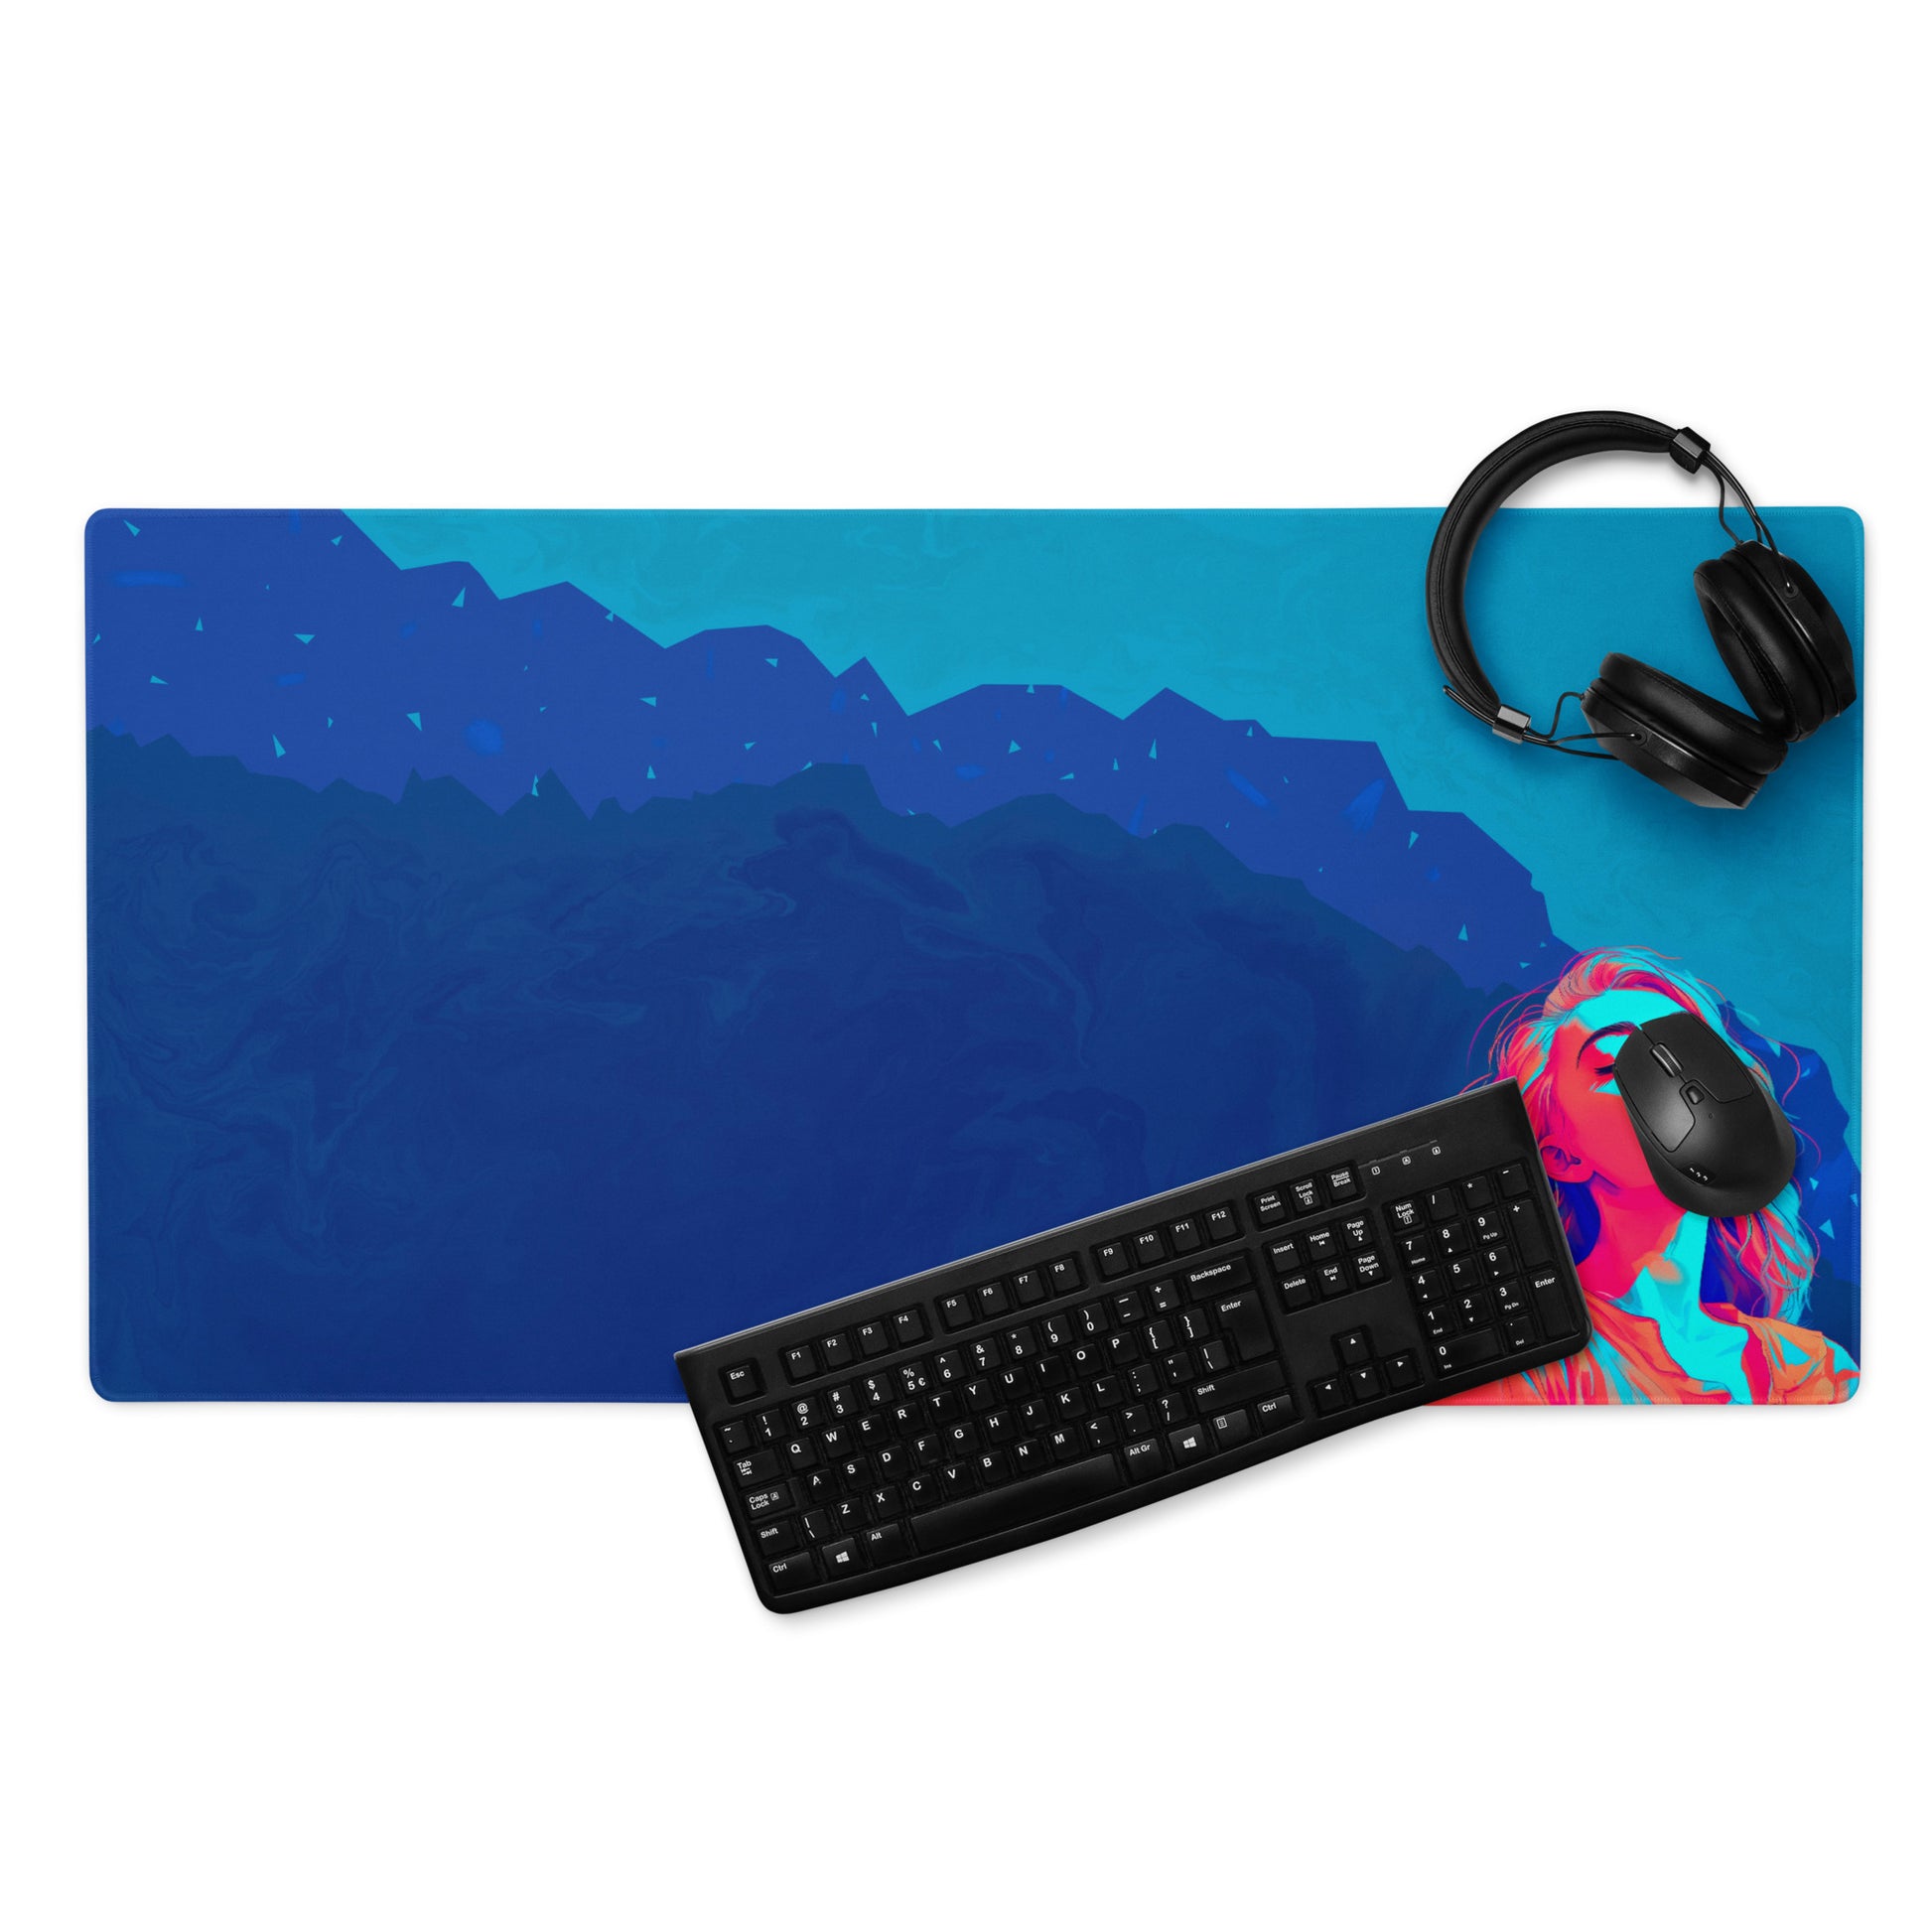 A 36" x 18" blue desk pad with a girl looking up. With a keyboard, mouse, and headphones sitting on it.